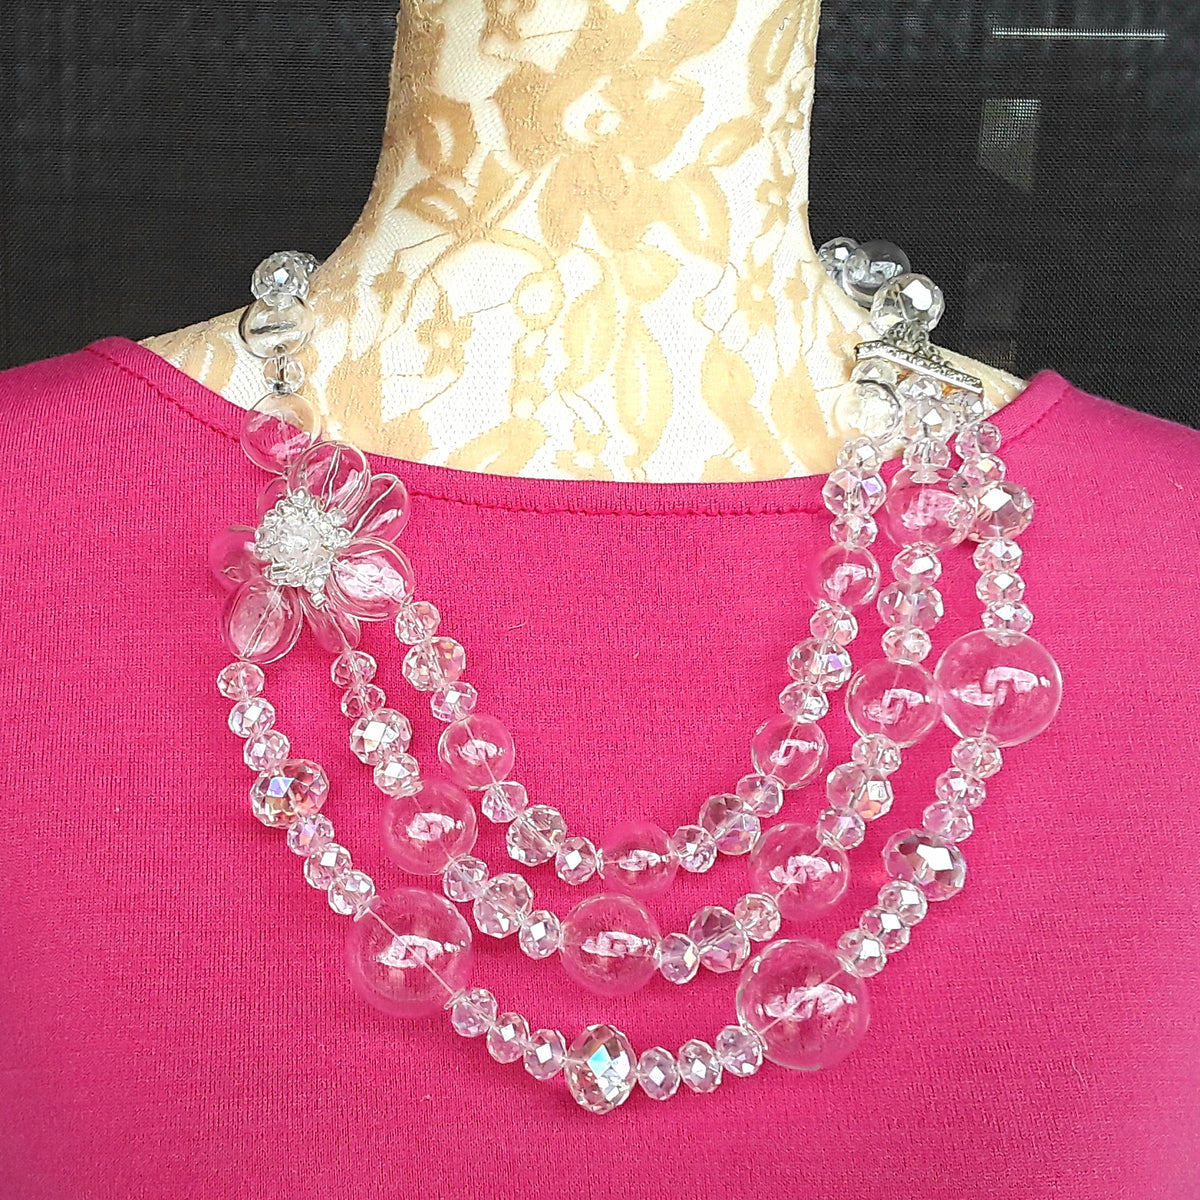 Hand Blown Clear Glass Beads Multi-Strand Statement Necklace, Chanel in Bubbles!!